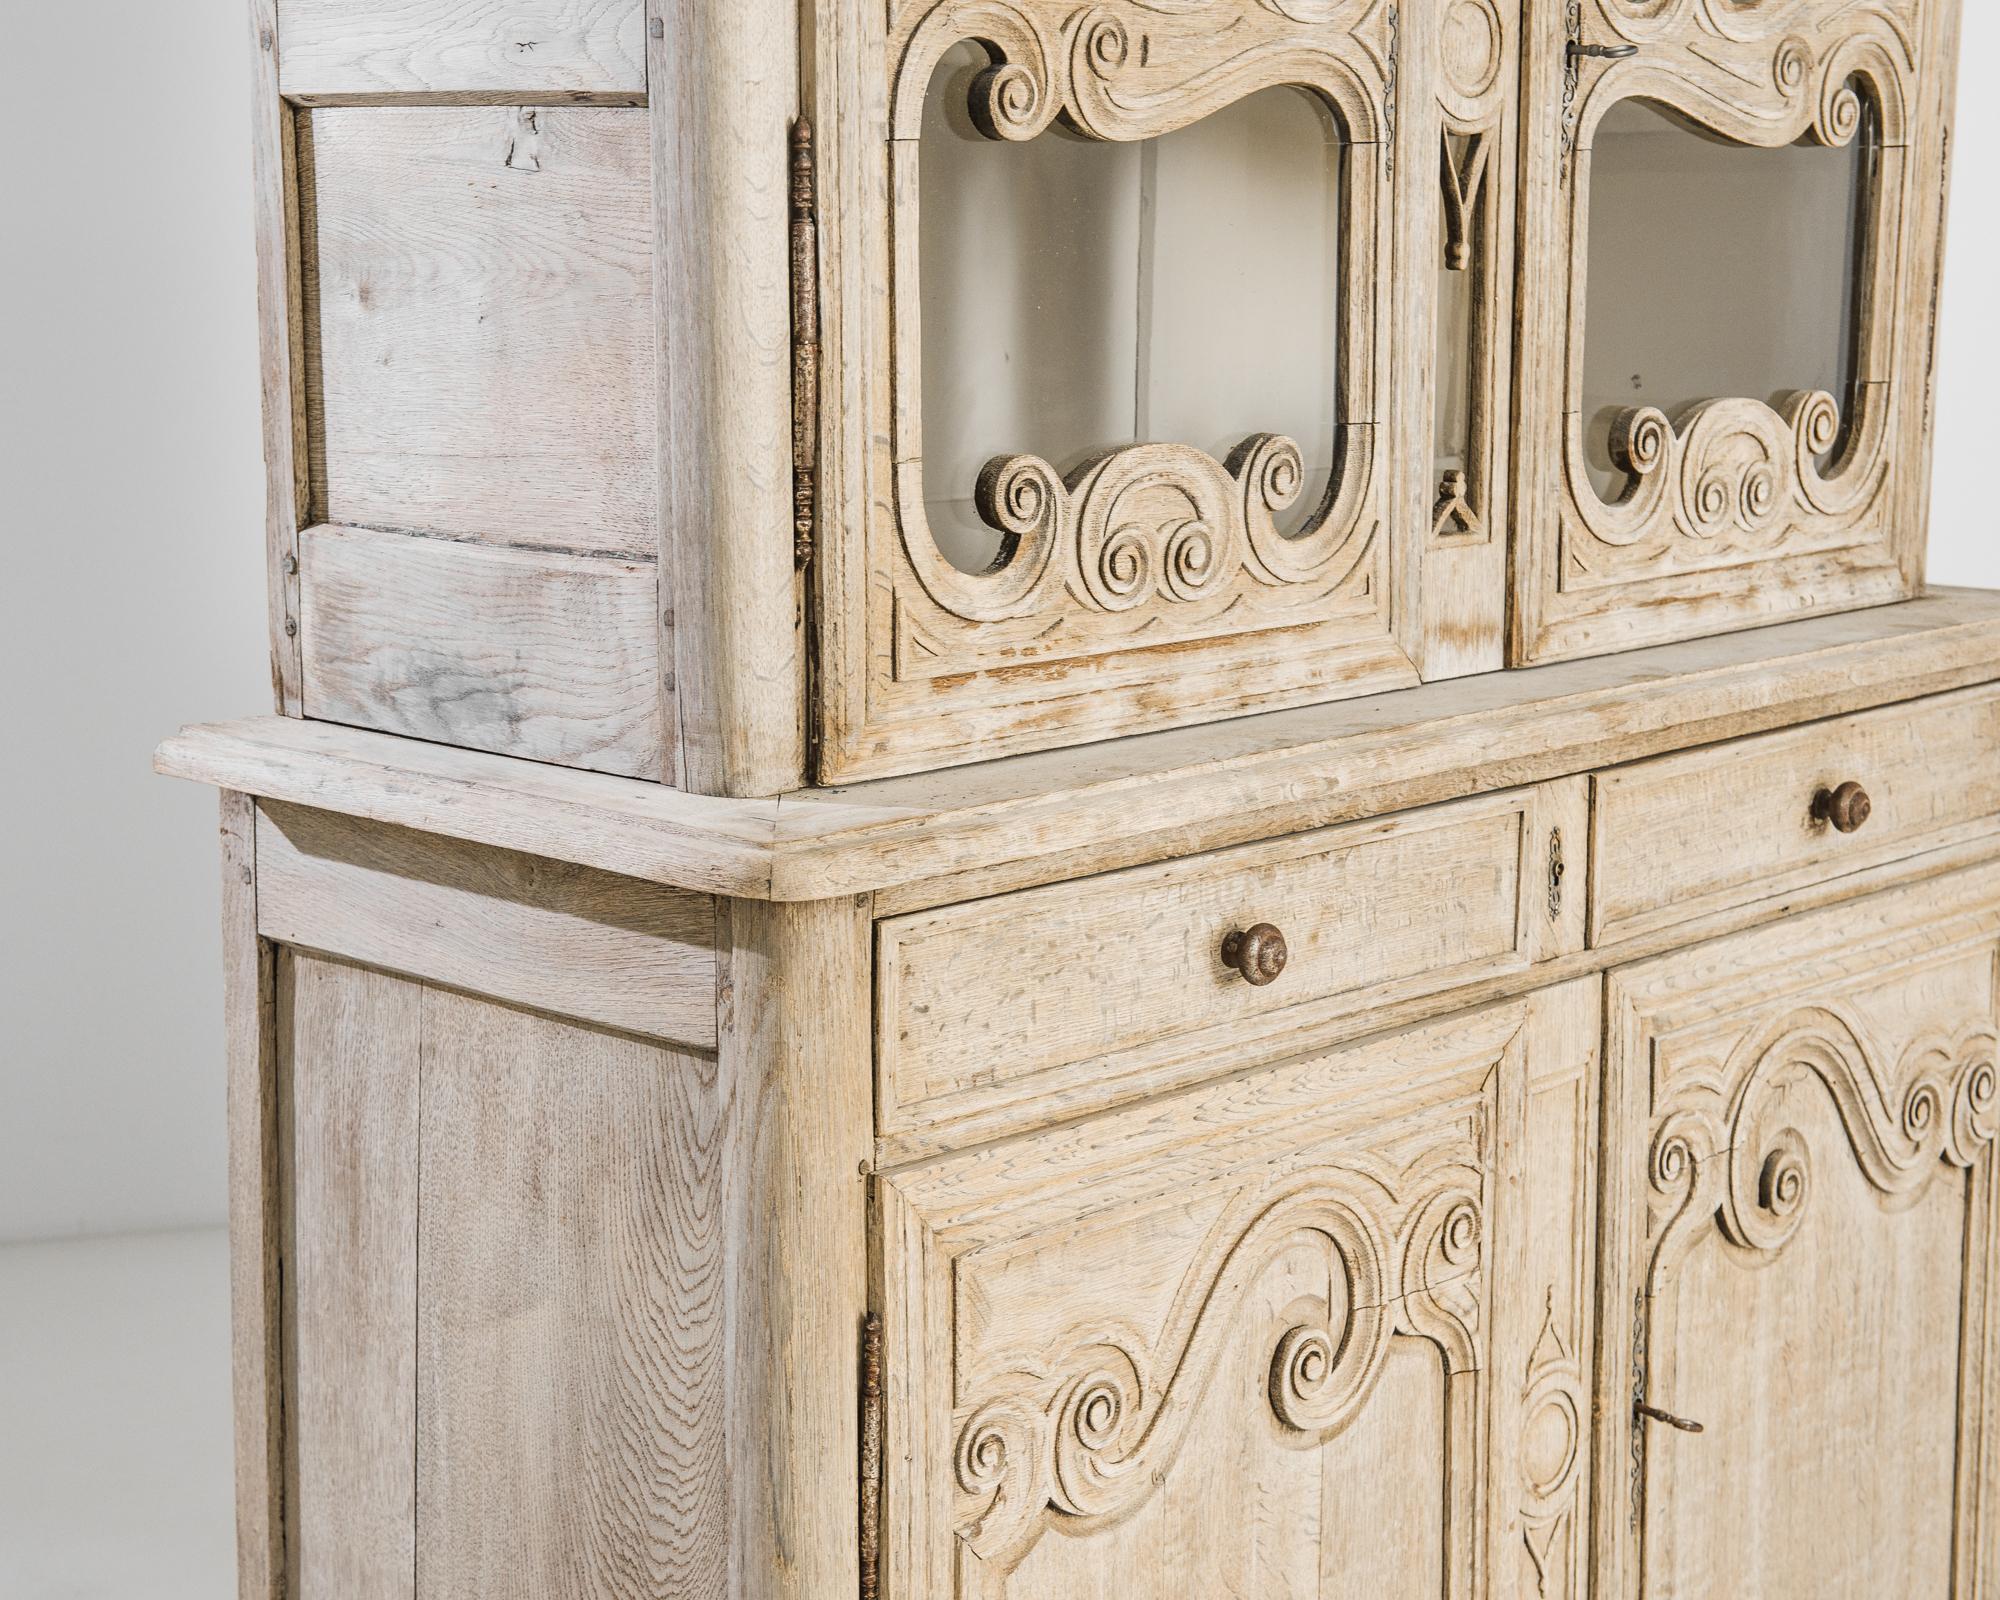 Scrolled moldings lend this statuesque vitrine a light-footed elegance. Built in France in the 1820s, a series of spirals give the panels of the drawers and the borders of the paned windows a vivacious fluidity. The wood has been restored to reveal